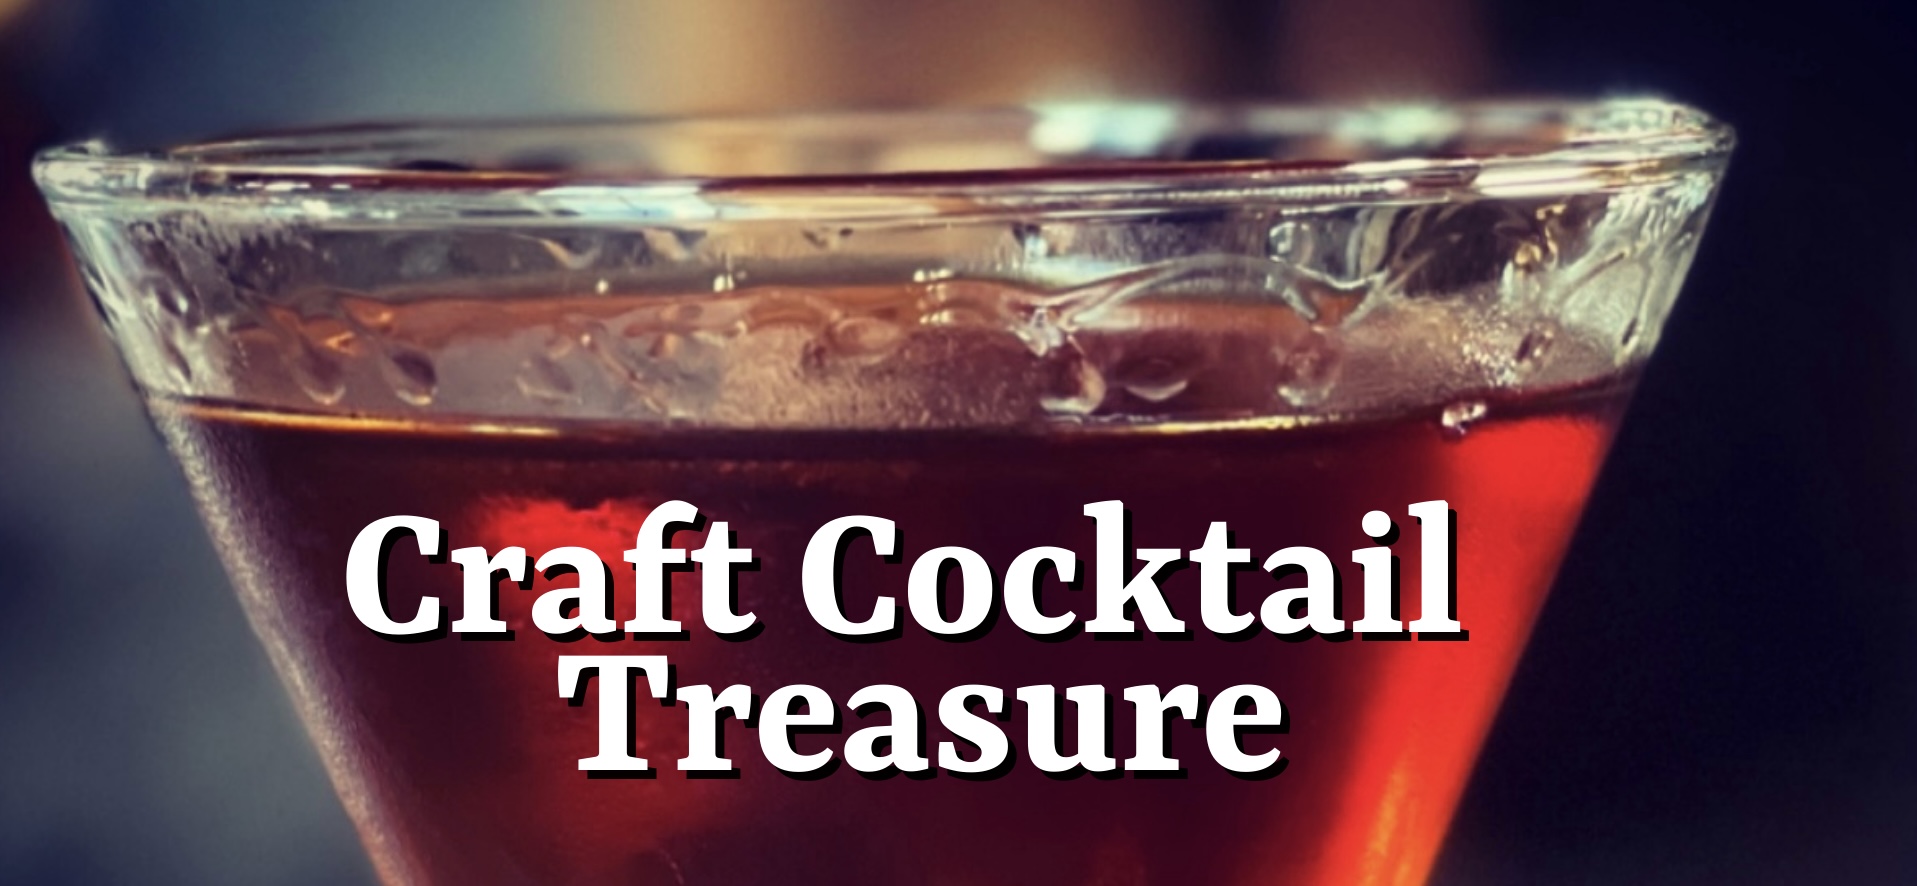 Craft Cocktail Treasure - Celebrating and Highlighting Cocktails You Will Love!